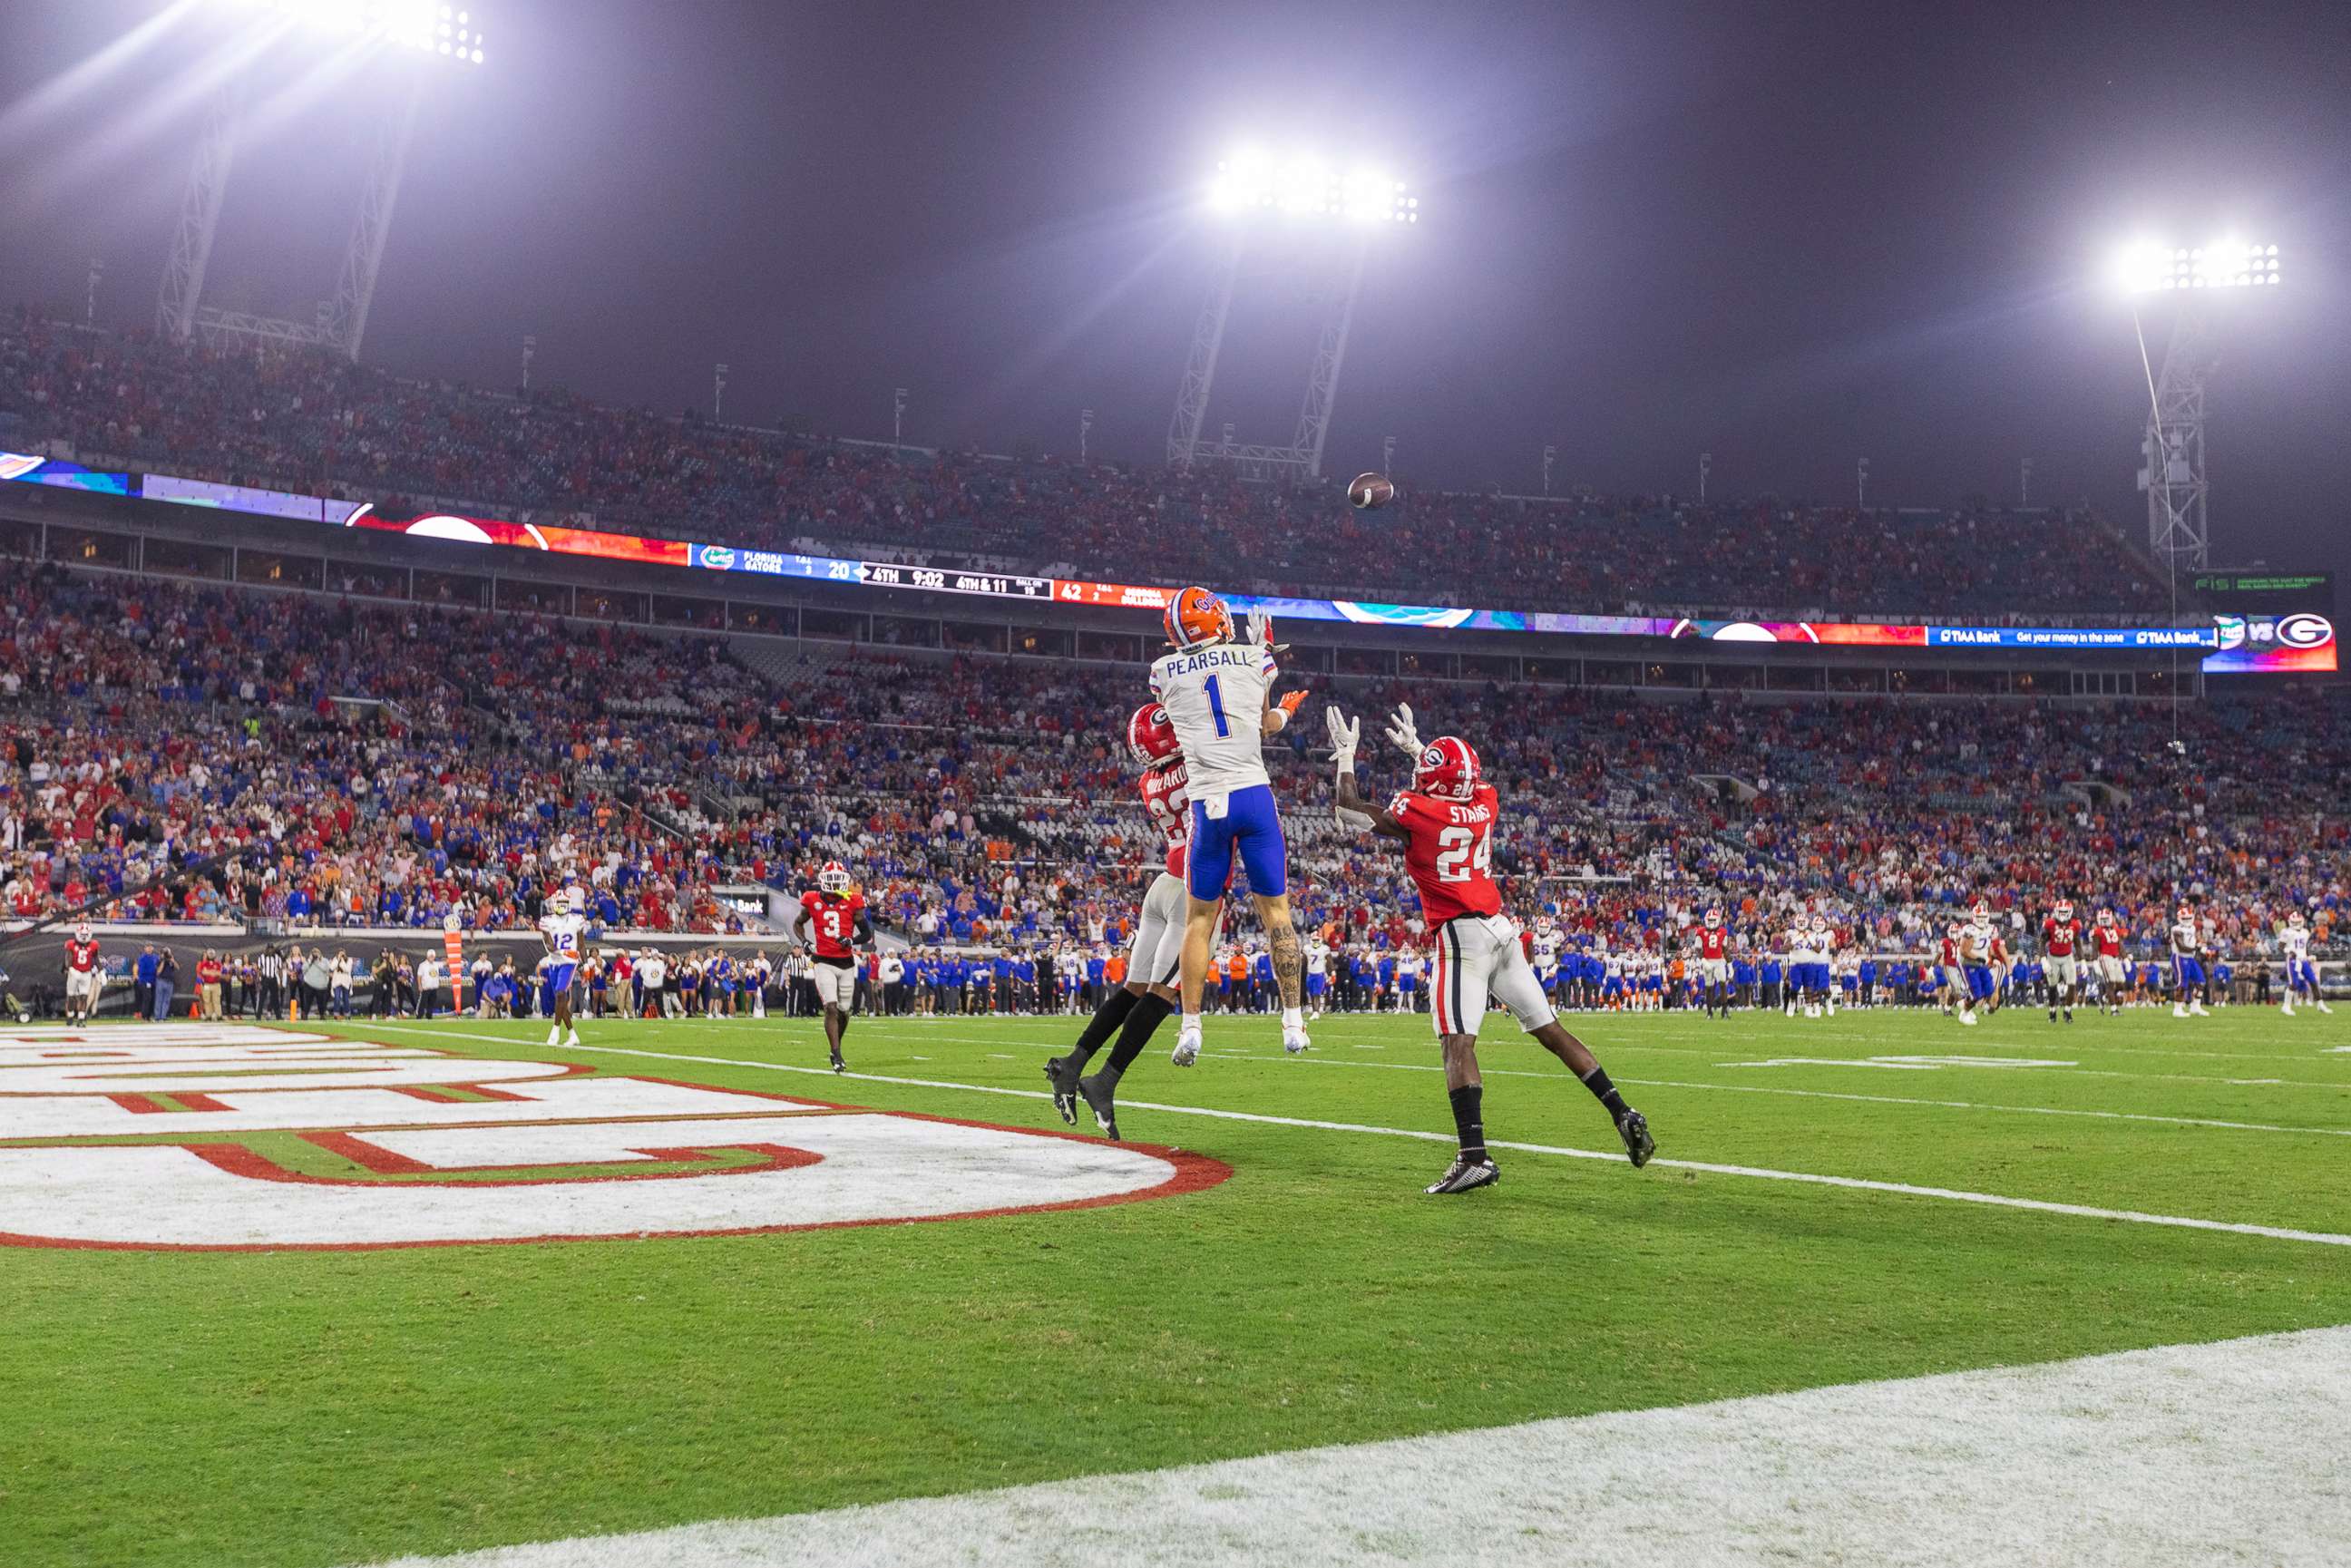 PHOTO: Ricky Pearsall of the Florida Gators attempts to catch a pass during the second half of a game against the Georgia Bulldogs at TIAA Bank Field on Oct. 29, 2022 in Jacksonville, Fla.